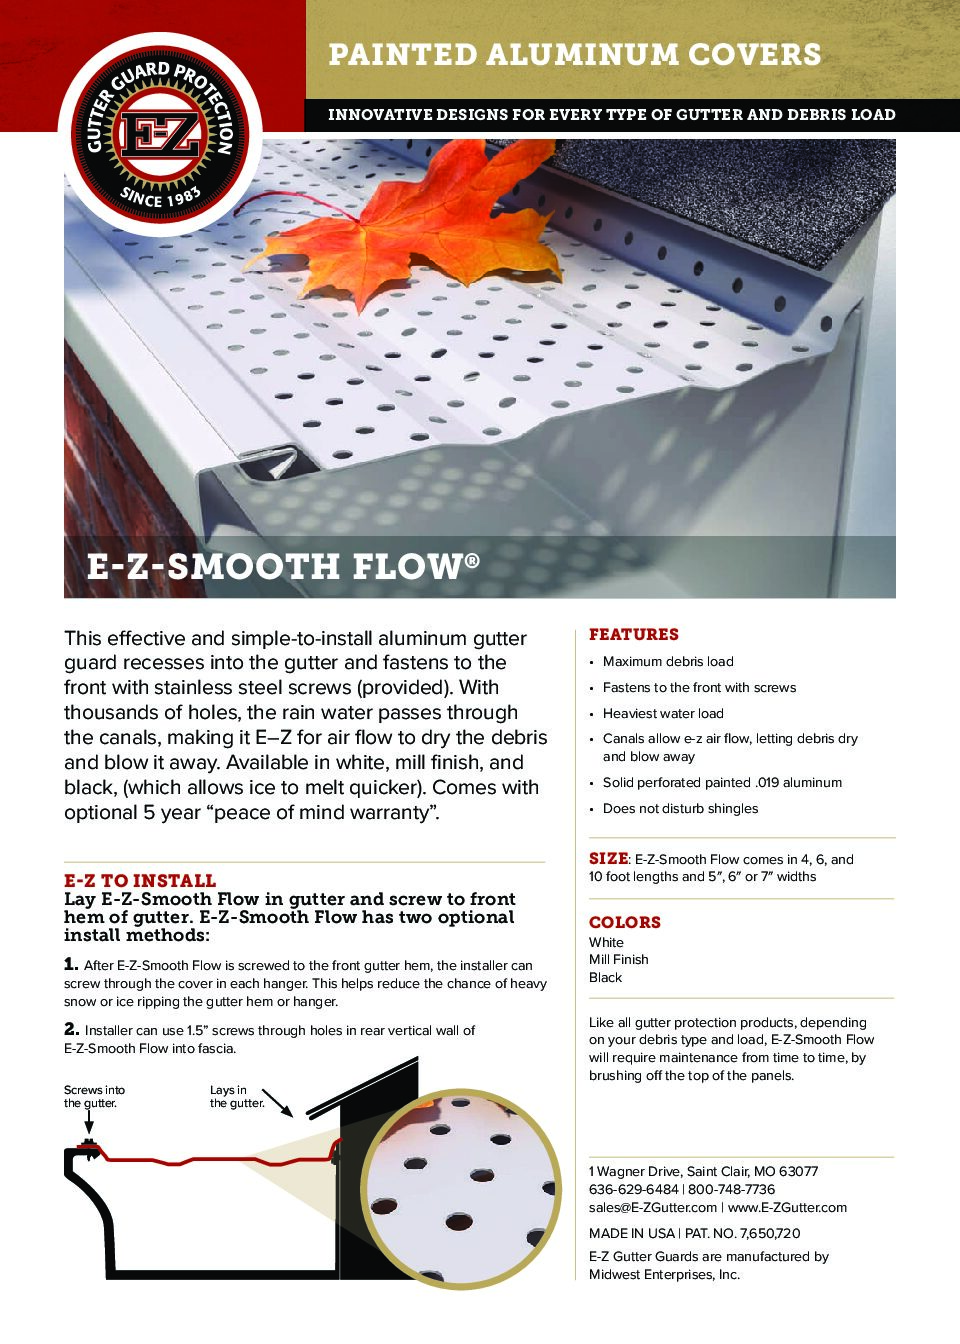 E-Z_Gutter_Sheets_SmoothFlow (1)